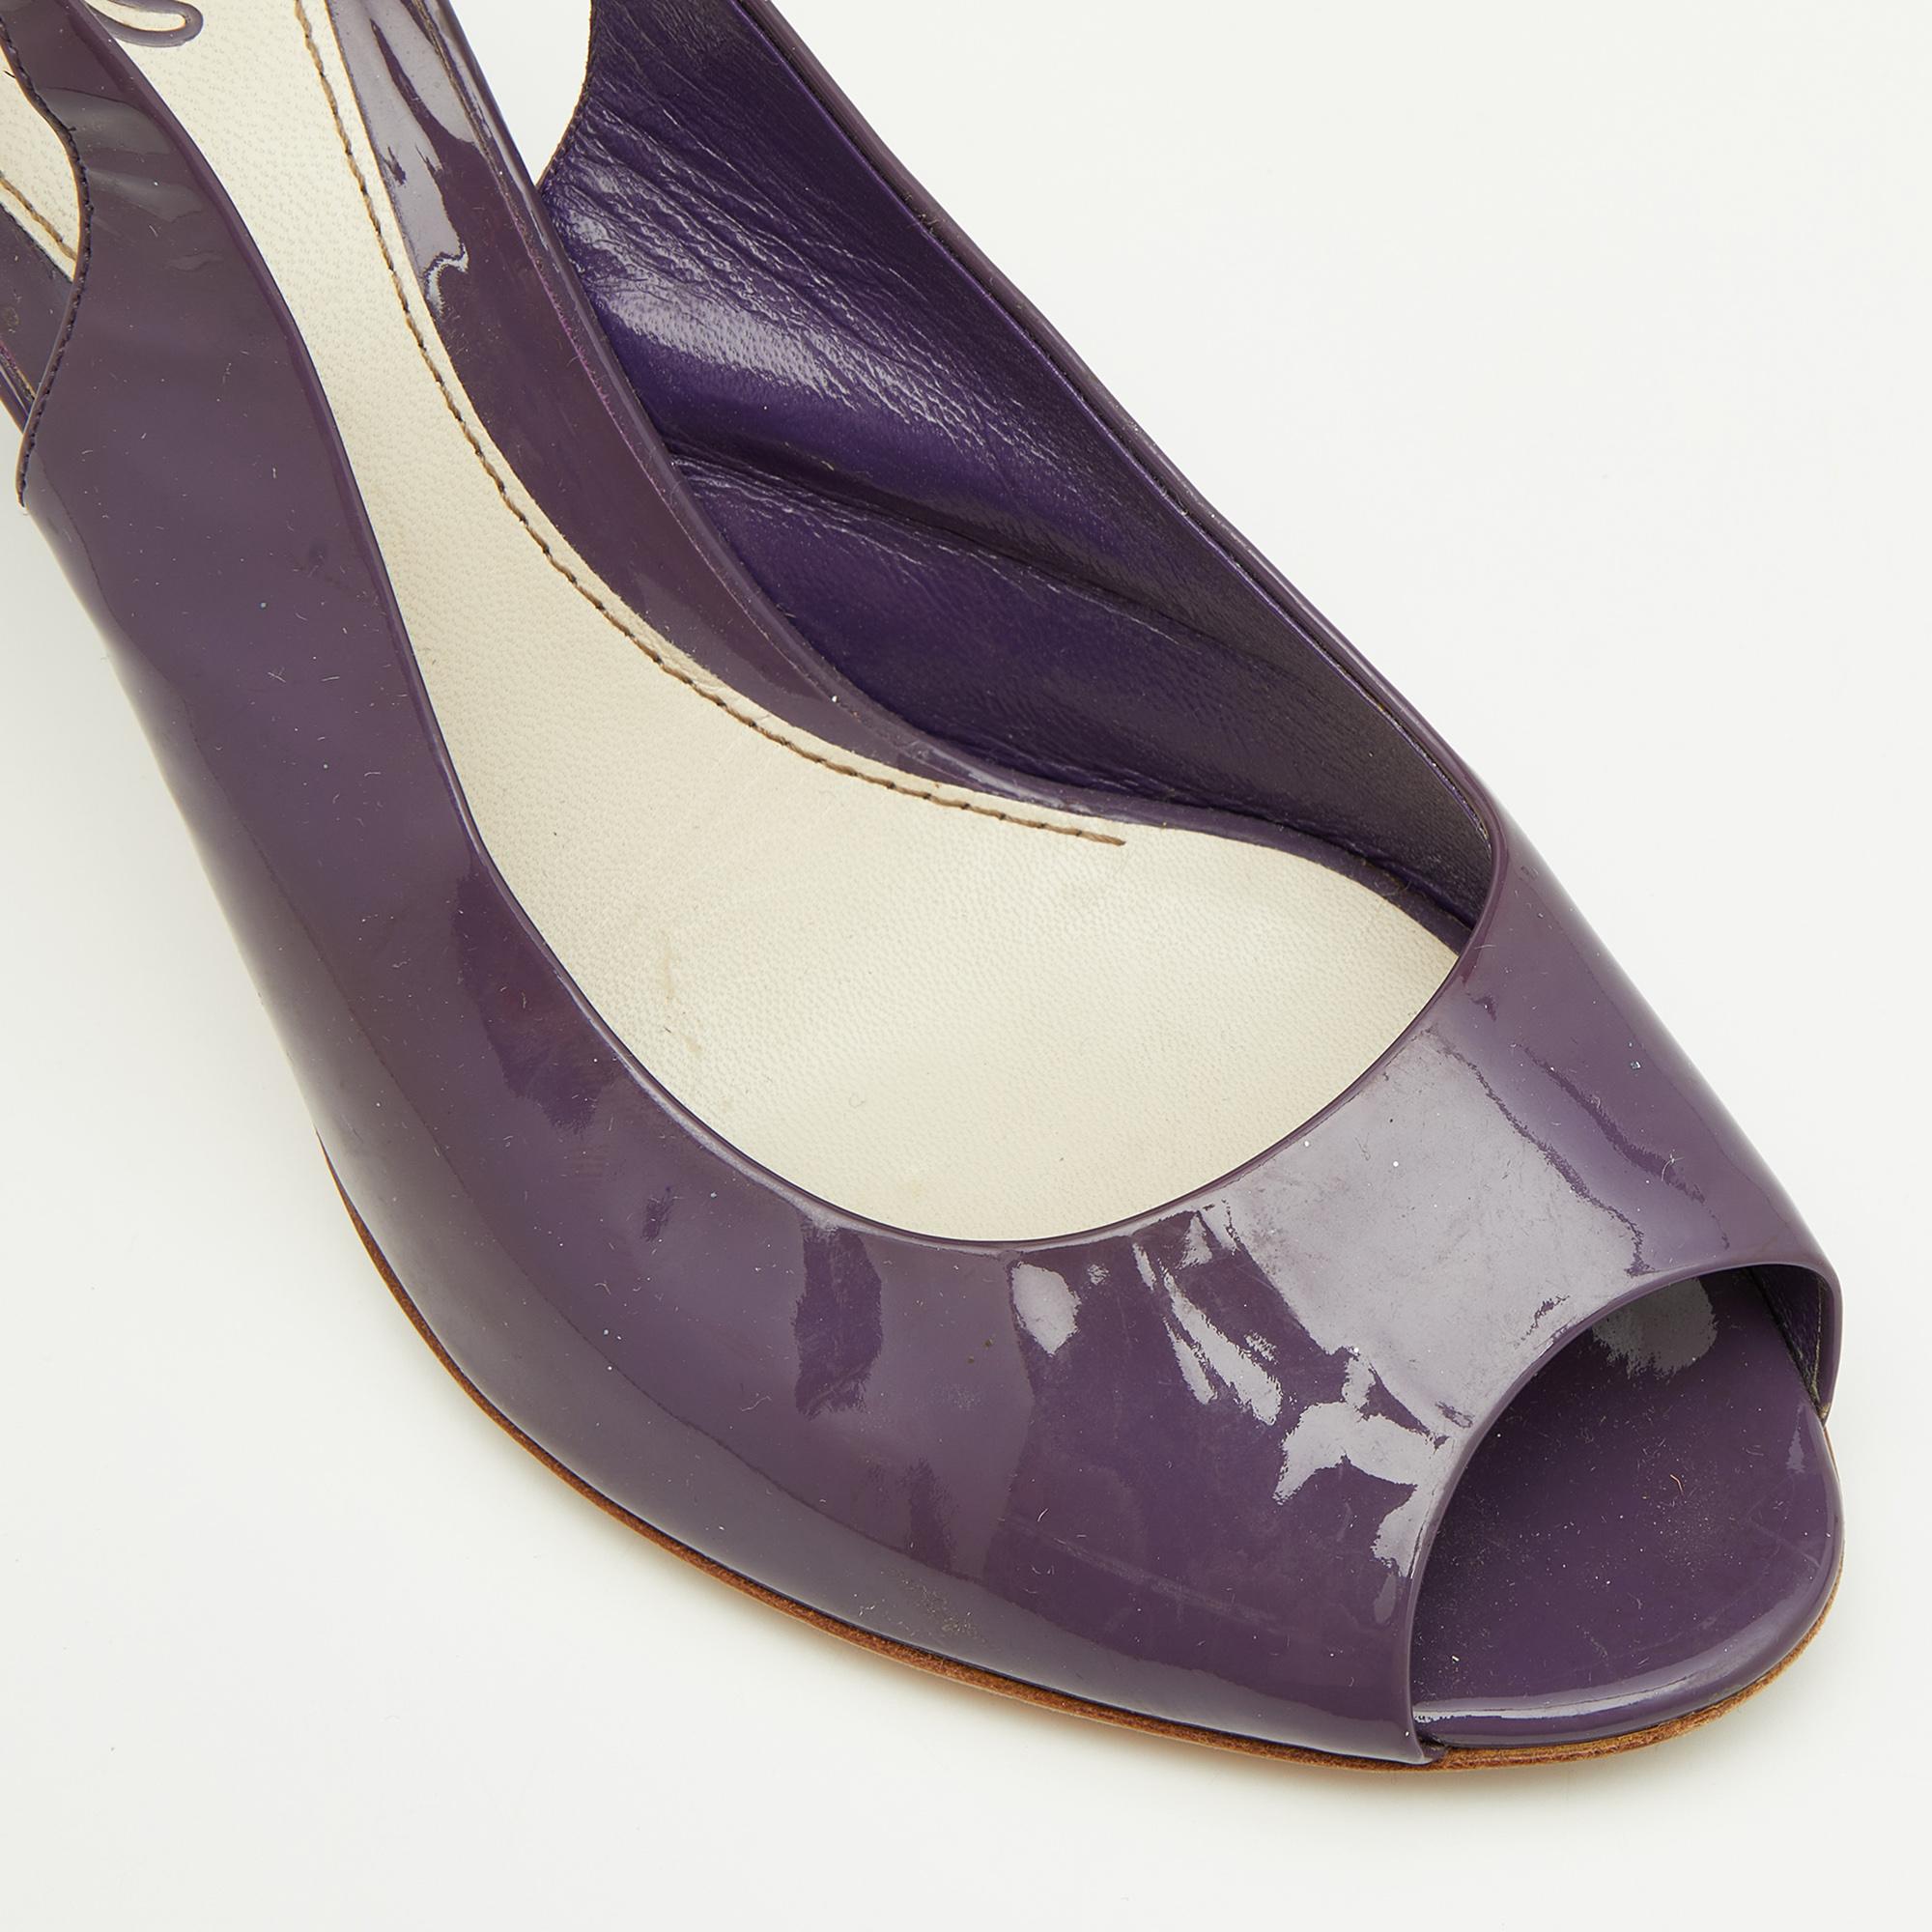 Gucci Purple Patent Leather Peep-Toe Slingback Sandals Size 38.5 For Sale 1